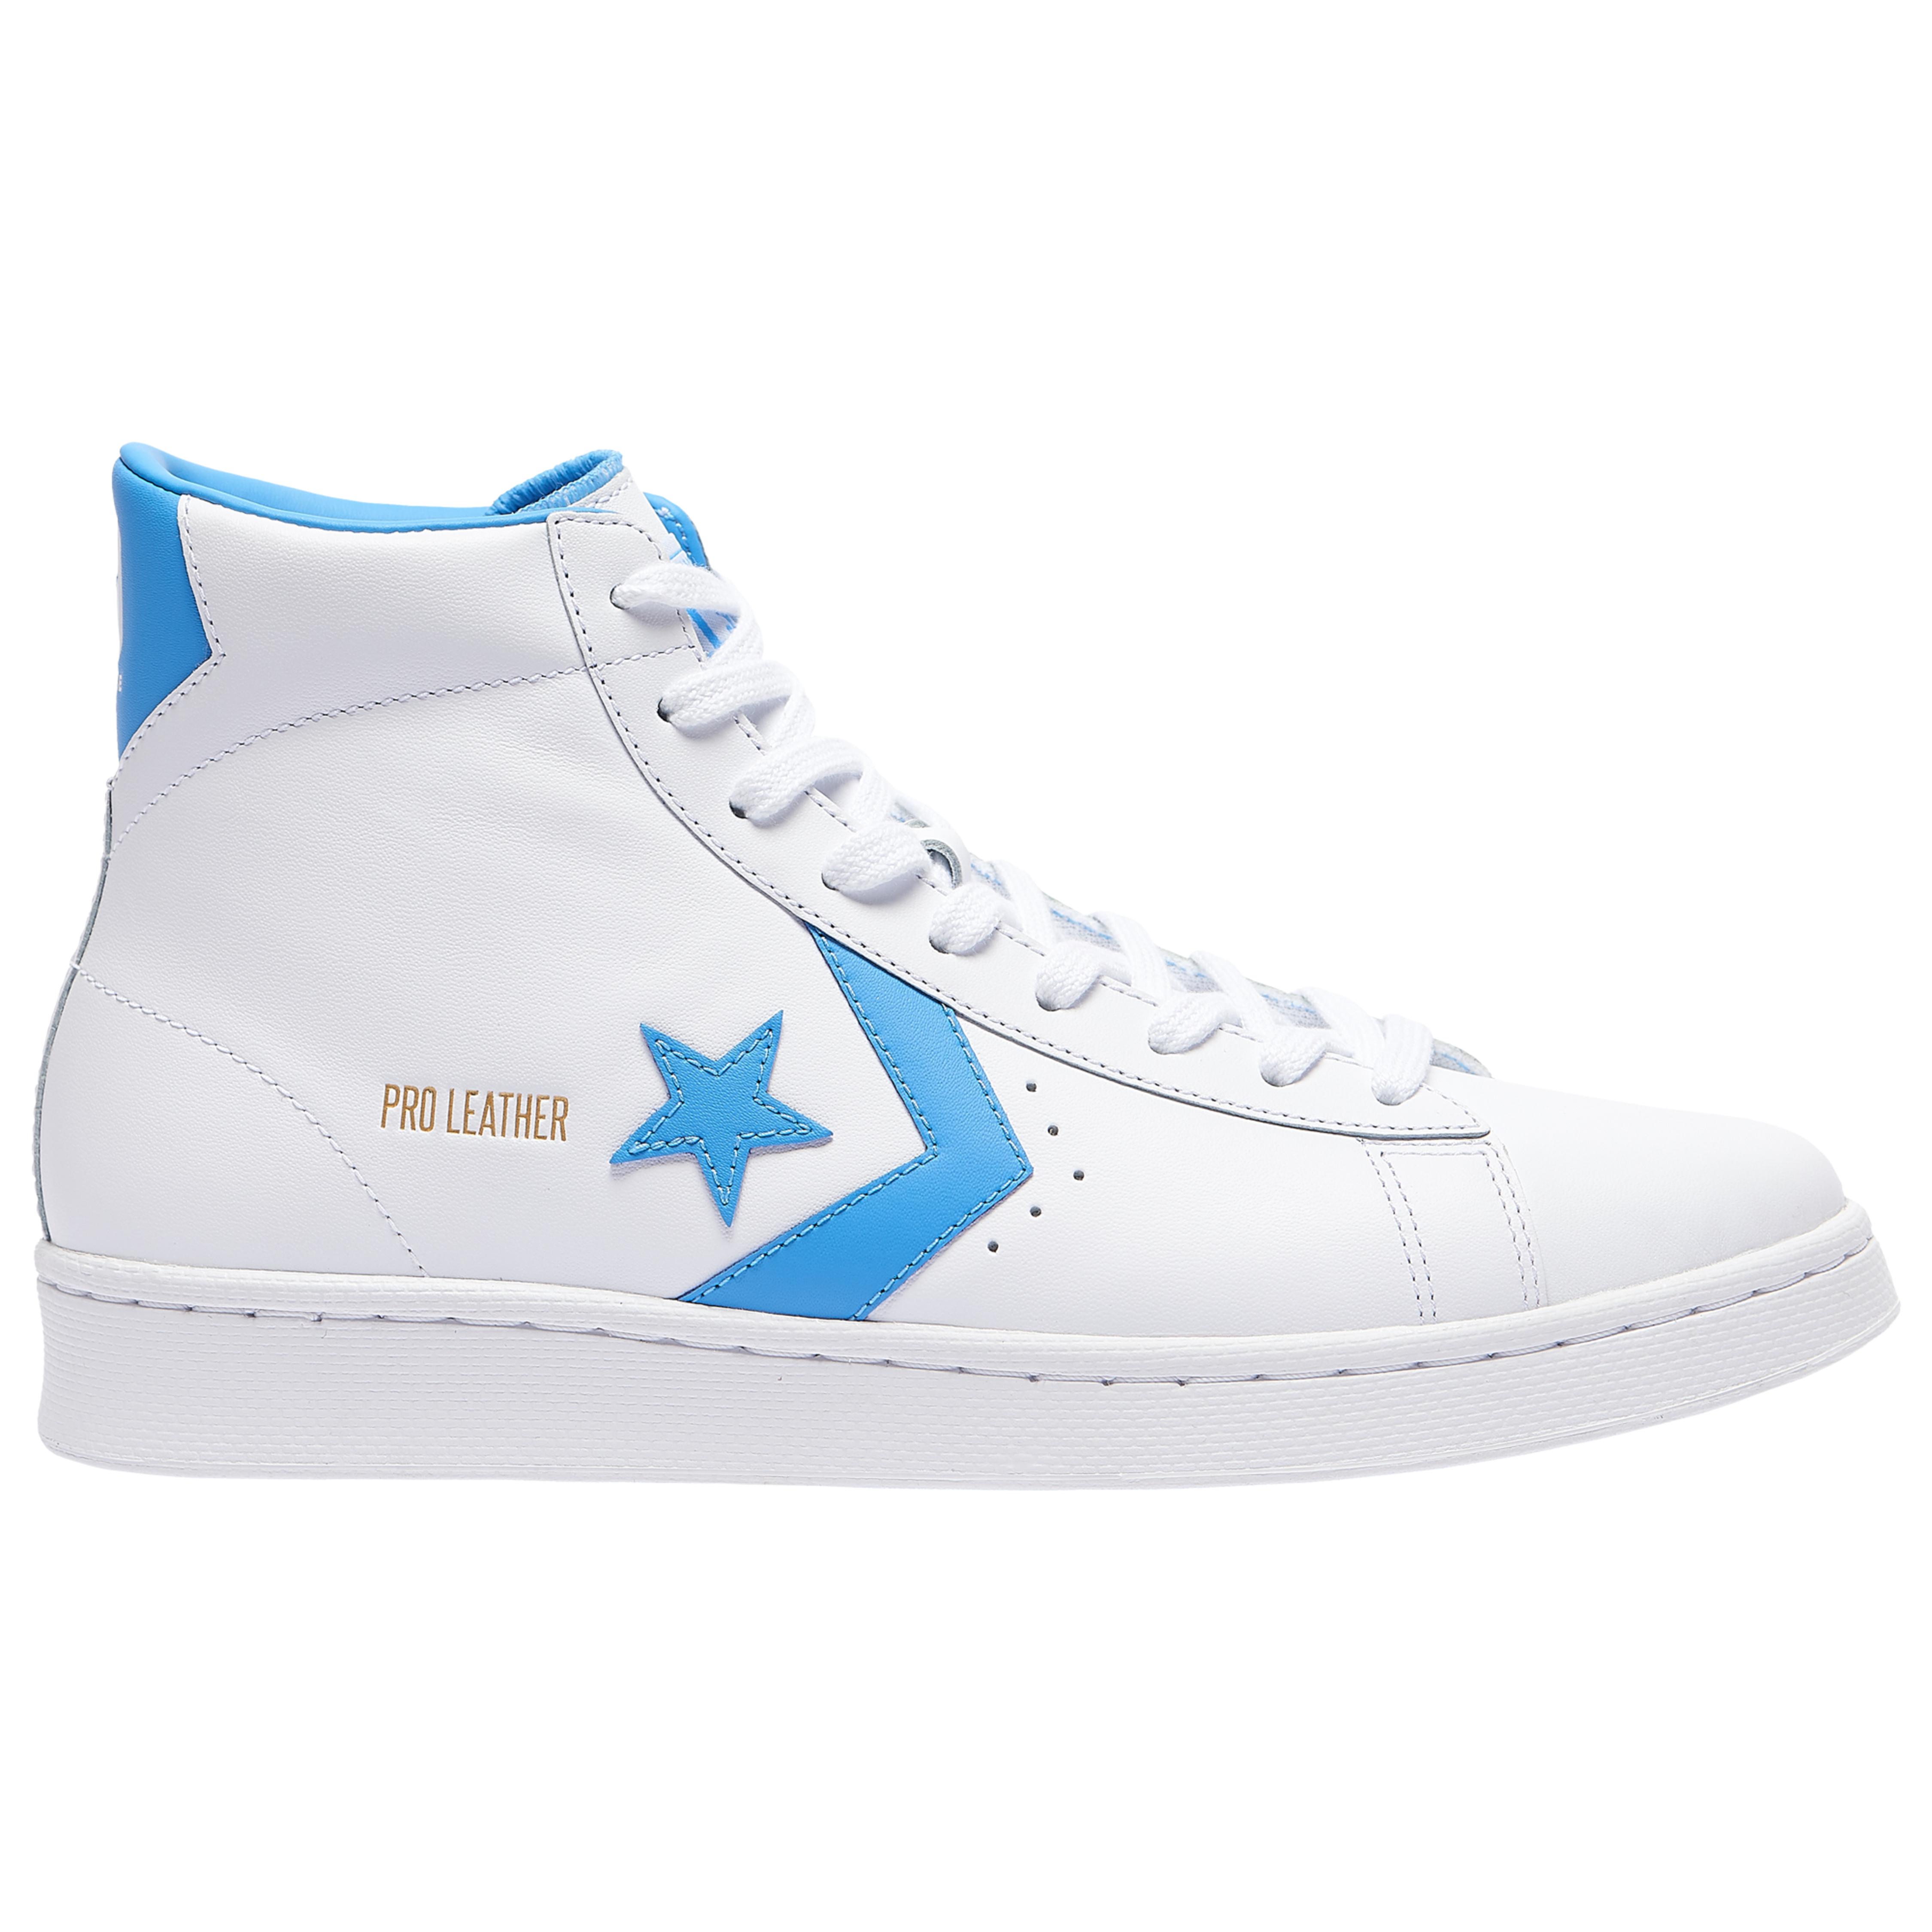 Converse Pro Leather Hi - Shoes in White for Men - Lyst